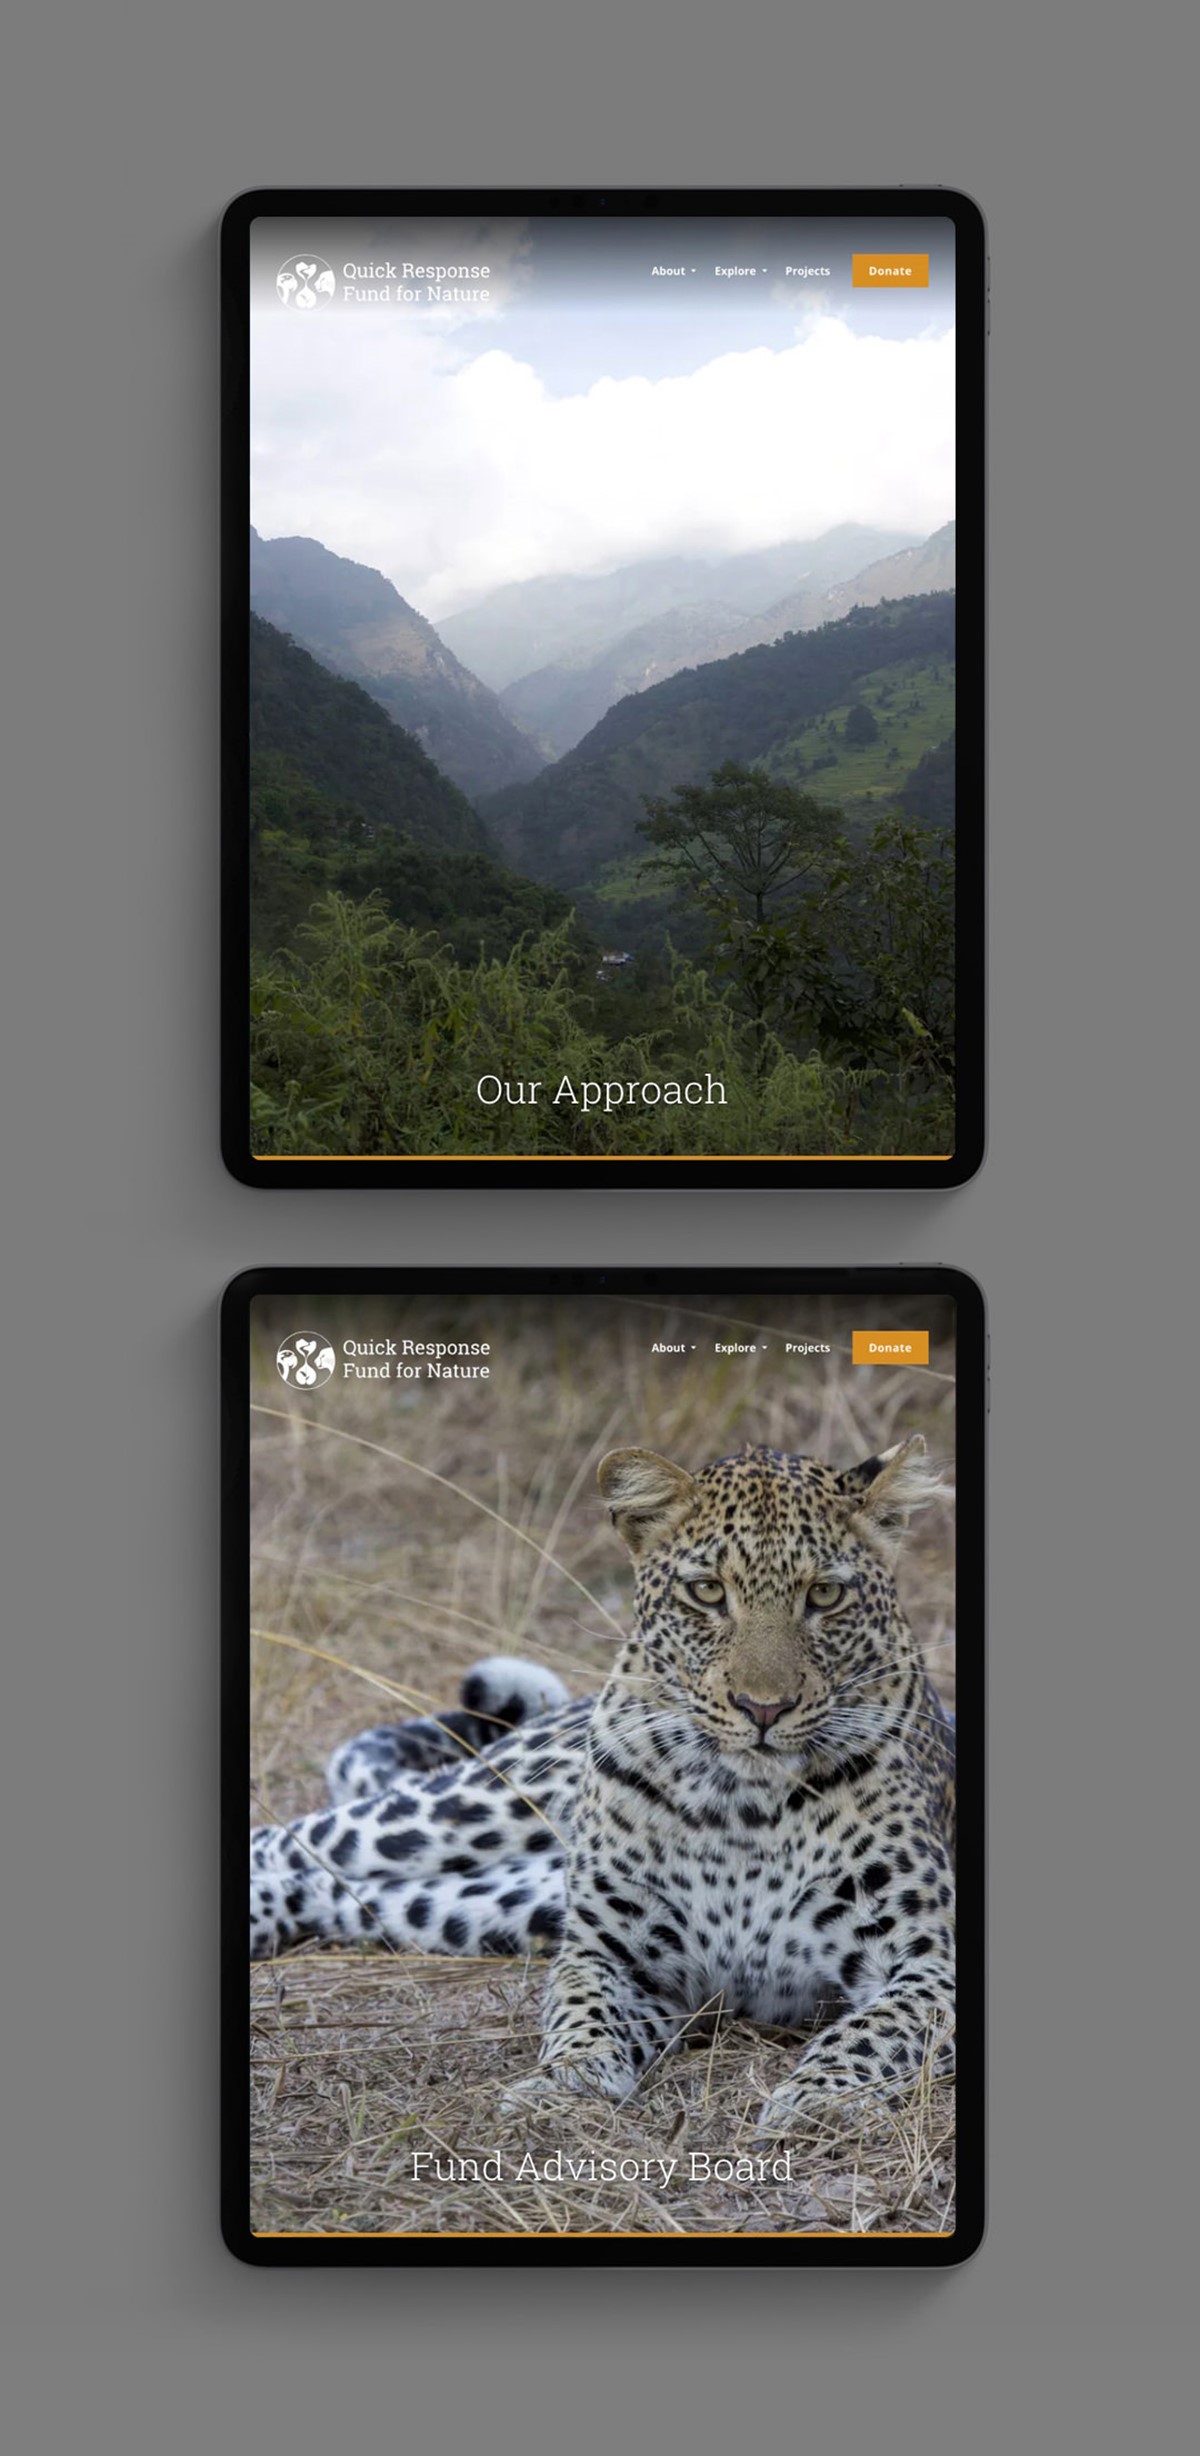 QRFN. Quick Response Fund for Nature – DiCaprio Foundation. Website. Brand identity design by Superfried. 